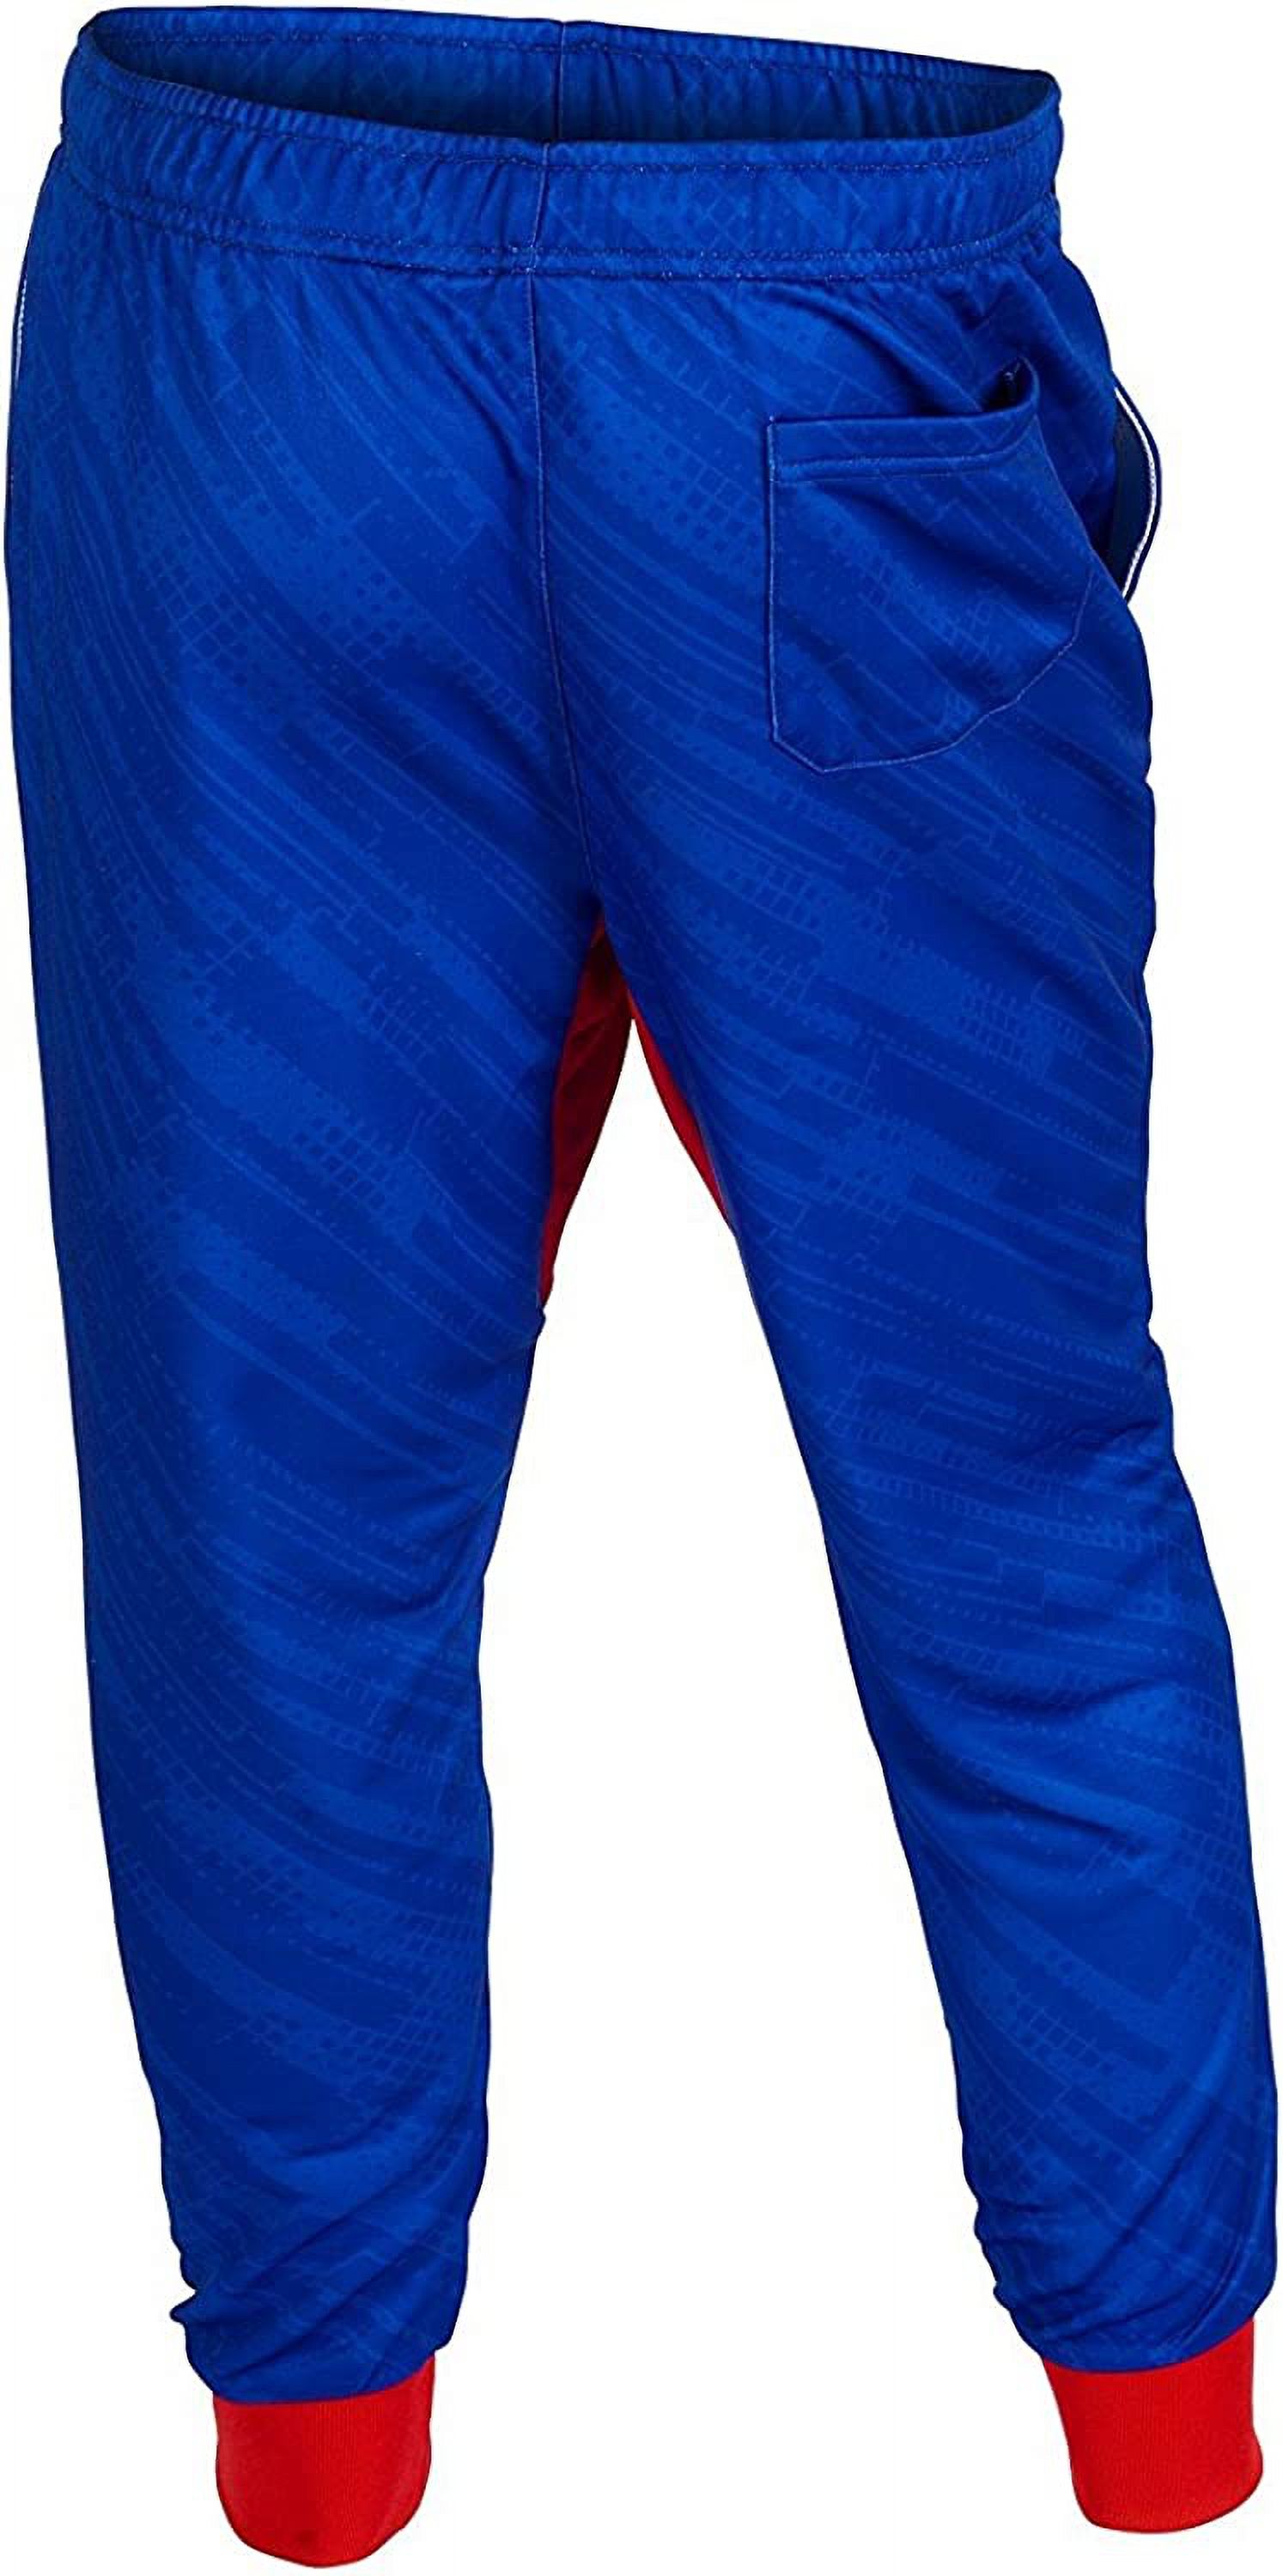 KLEW NHL Men's New York Rangers Cuffed Jogger Pants, Blue - image 2 of 2